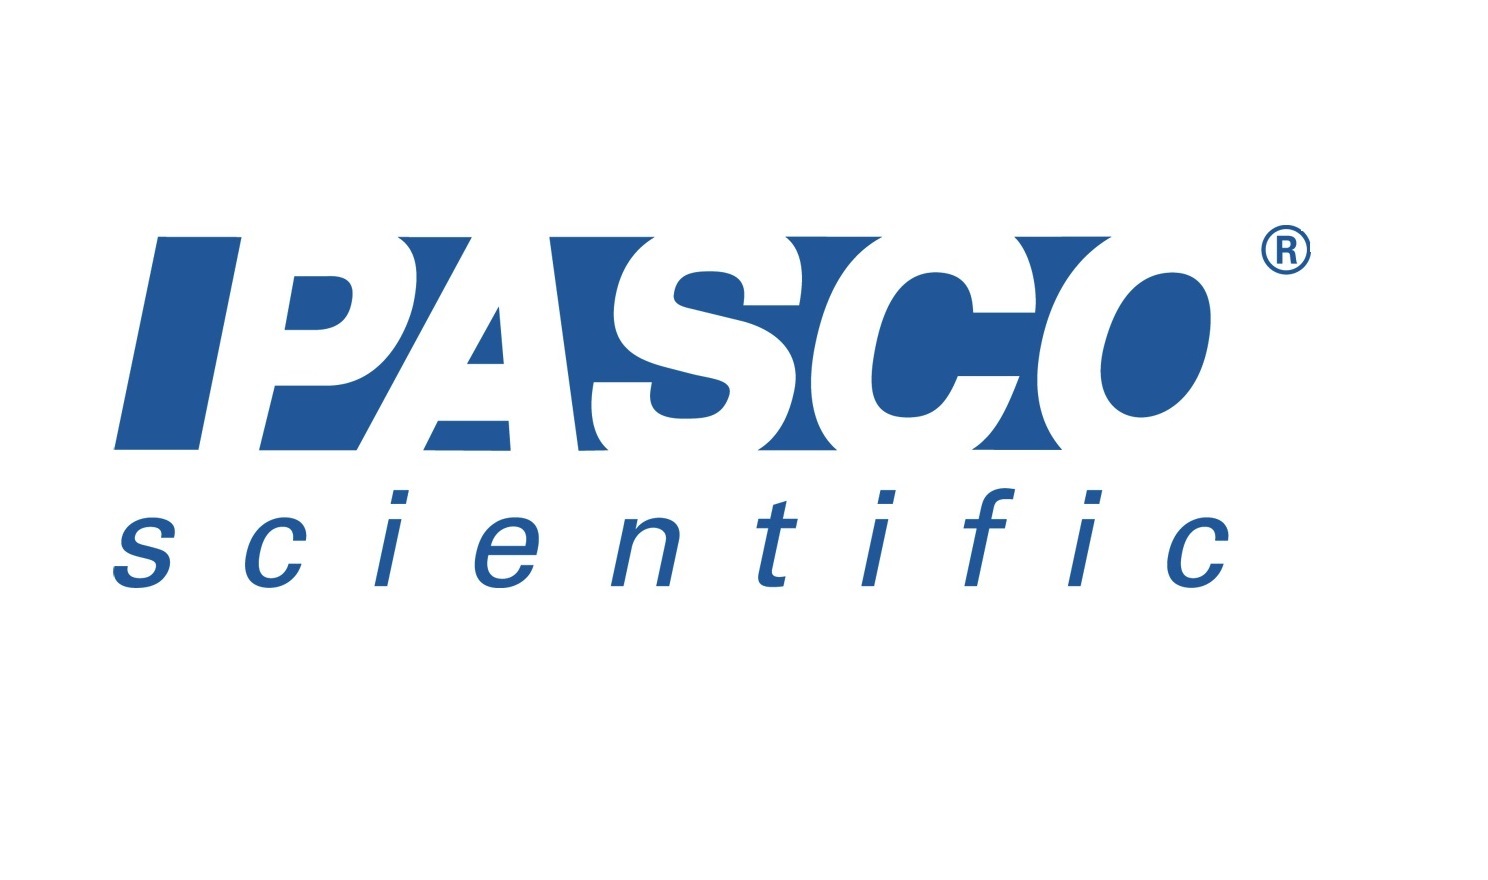 <span style="font-weight: bold;">PASCO</span>